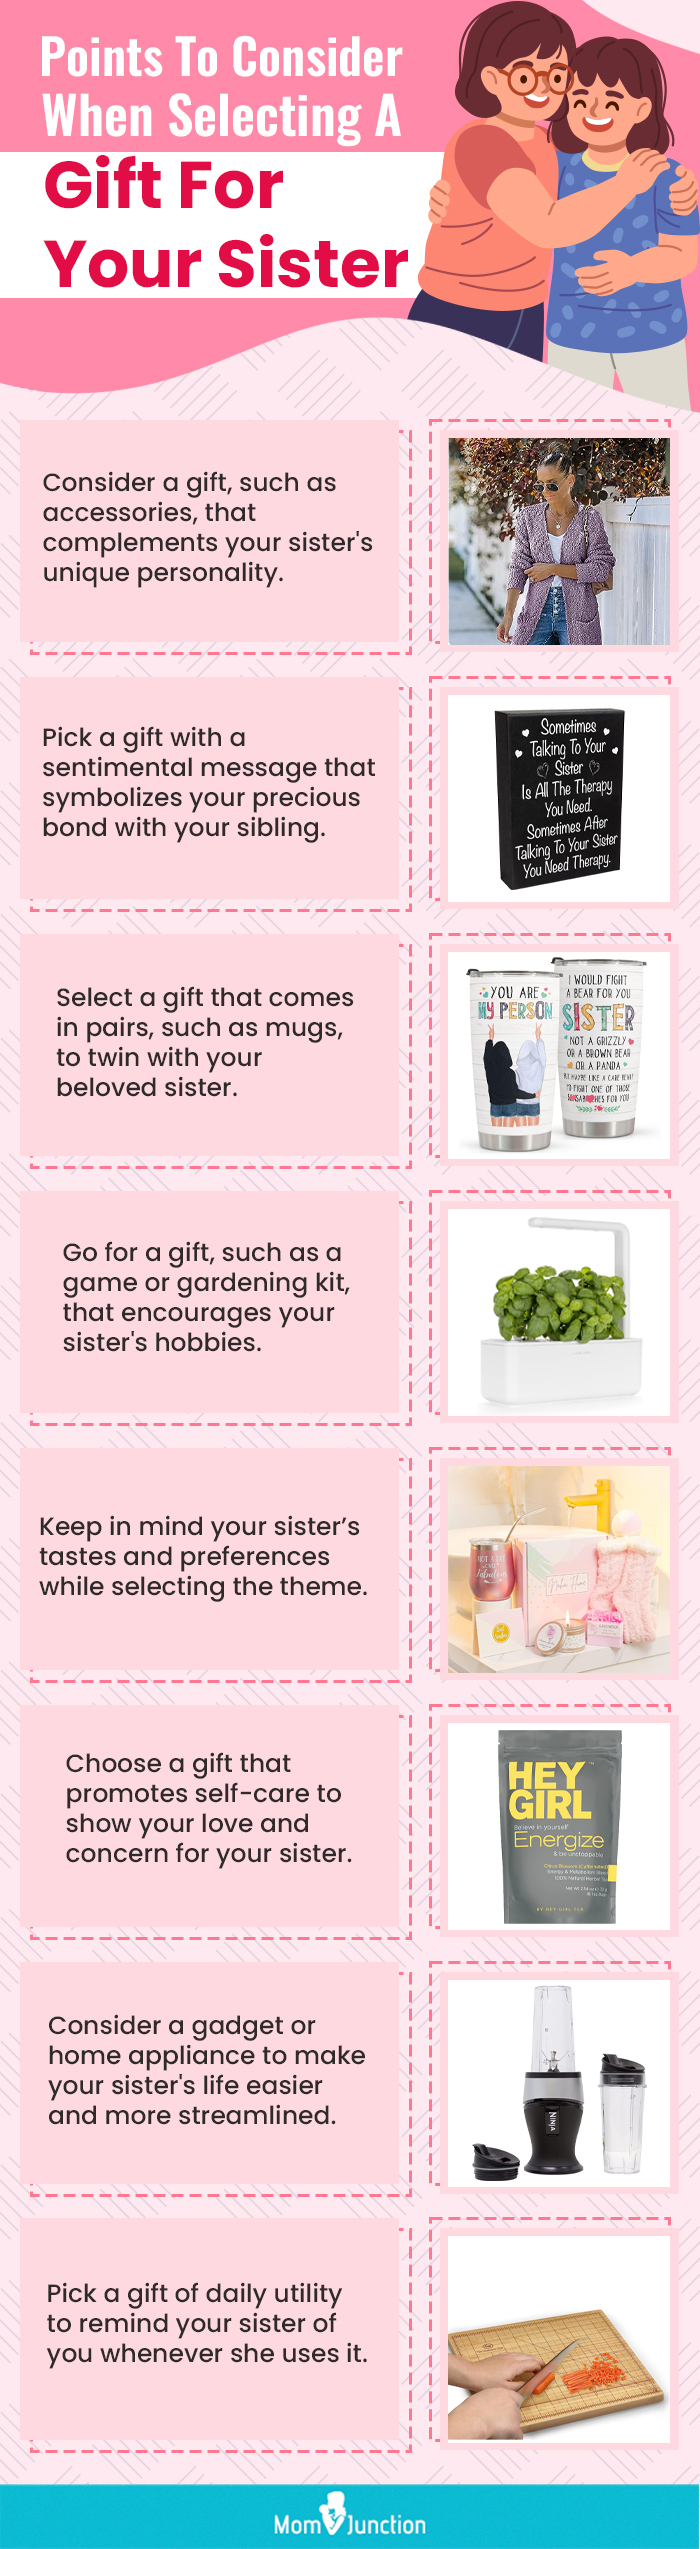 Points To Consider When Selecting A Gift For Your Sister (infographic)